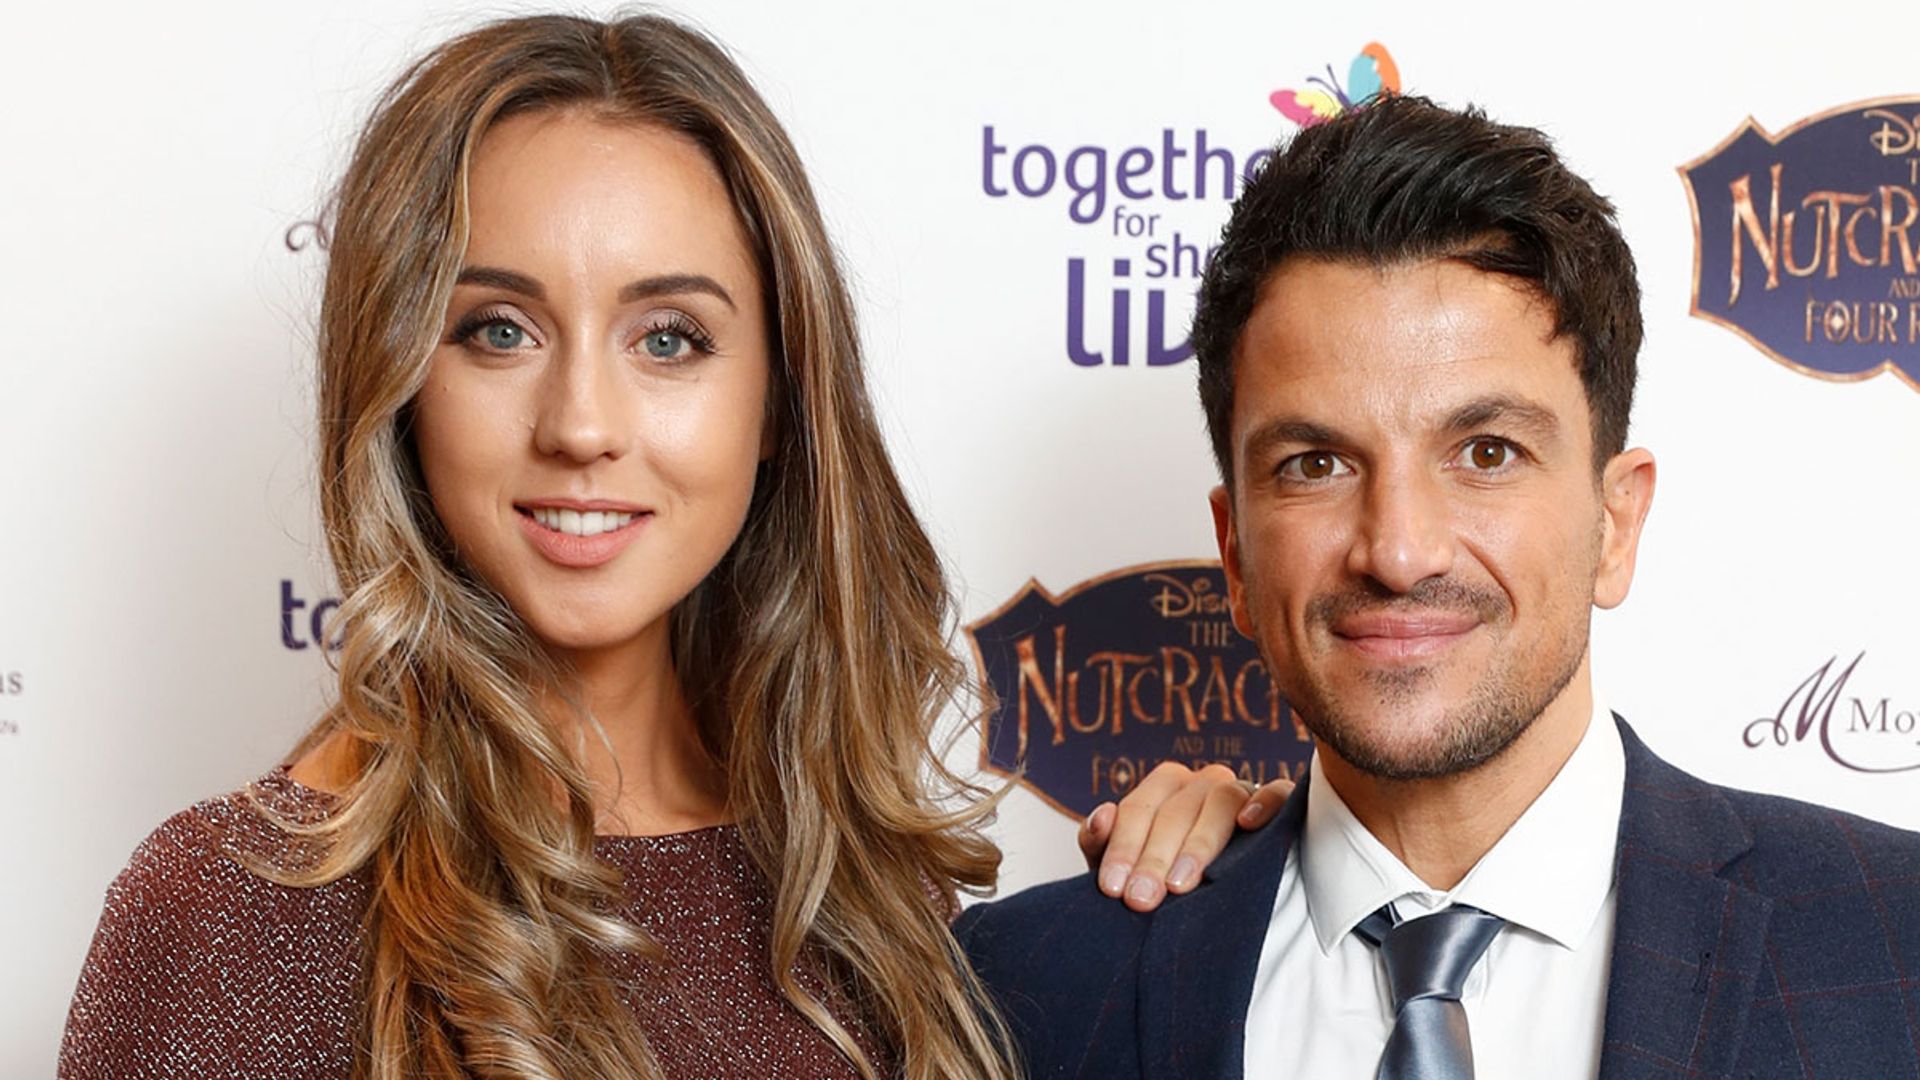 Peter Andre makes shocking revelation about his date nights with wife ...